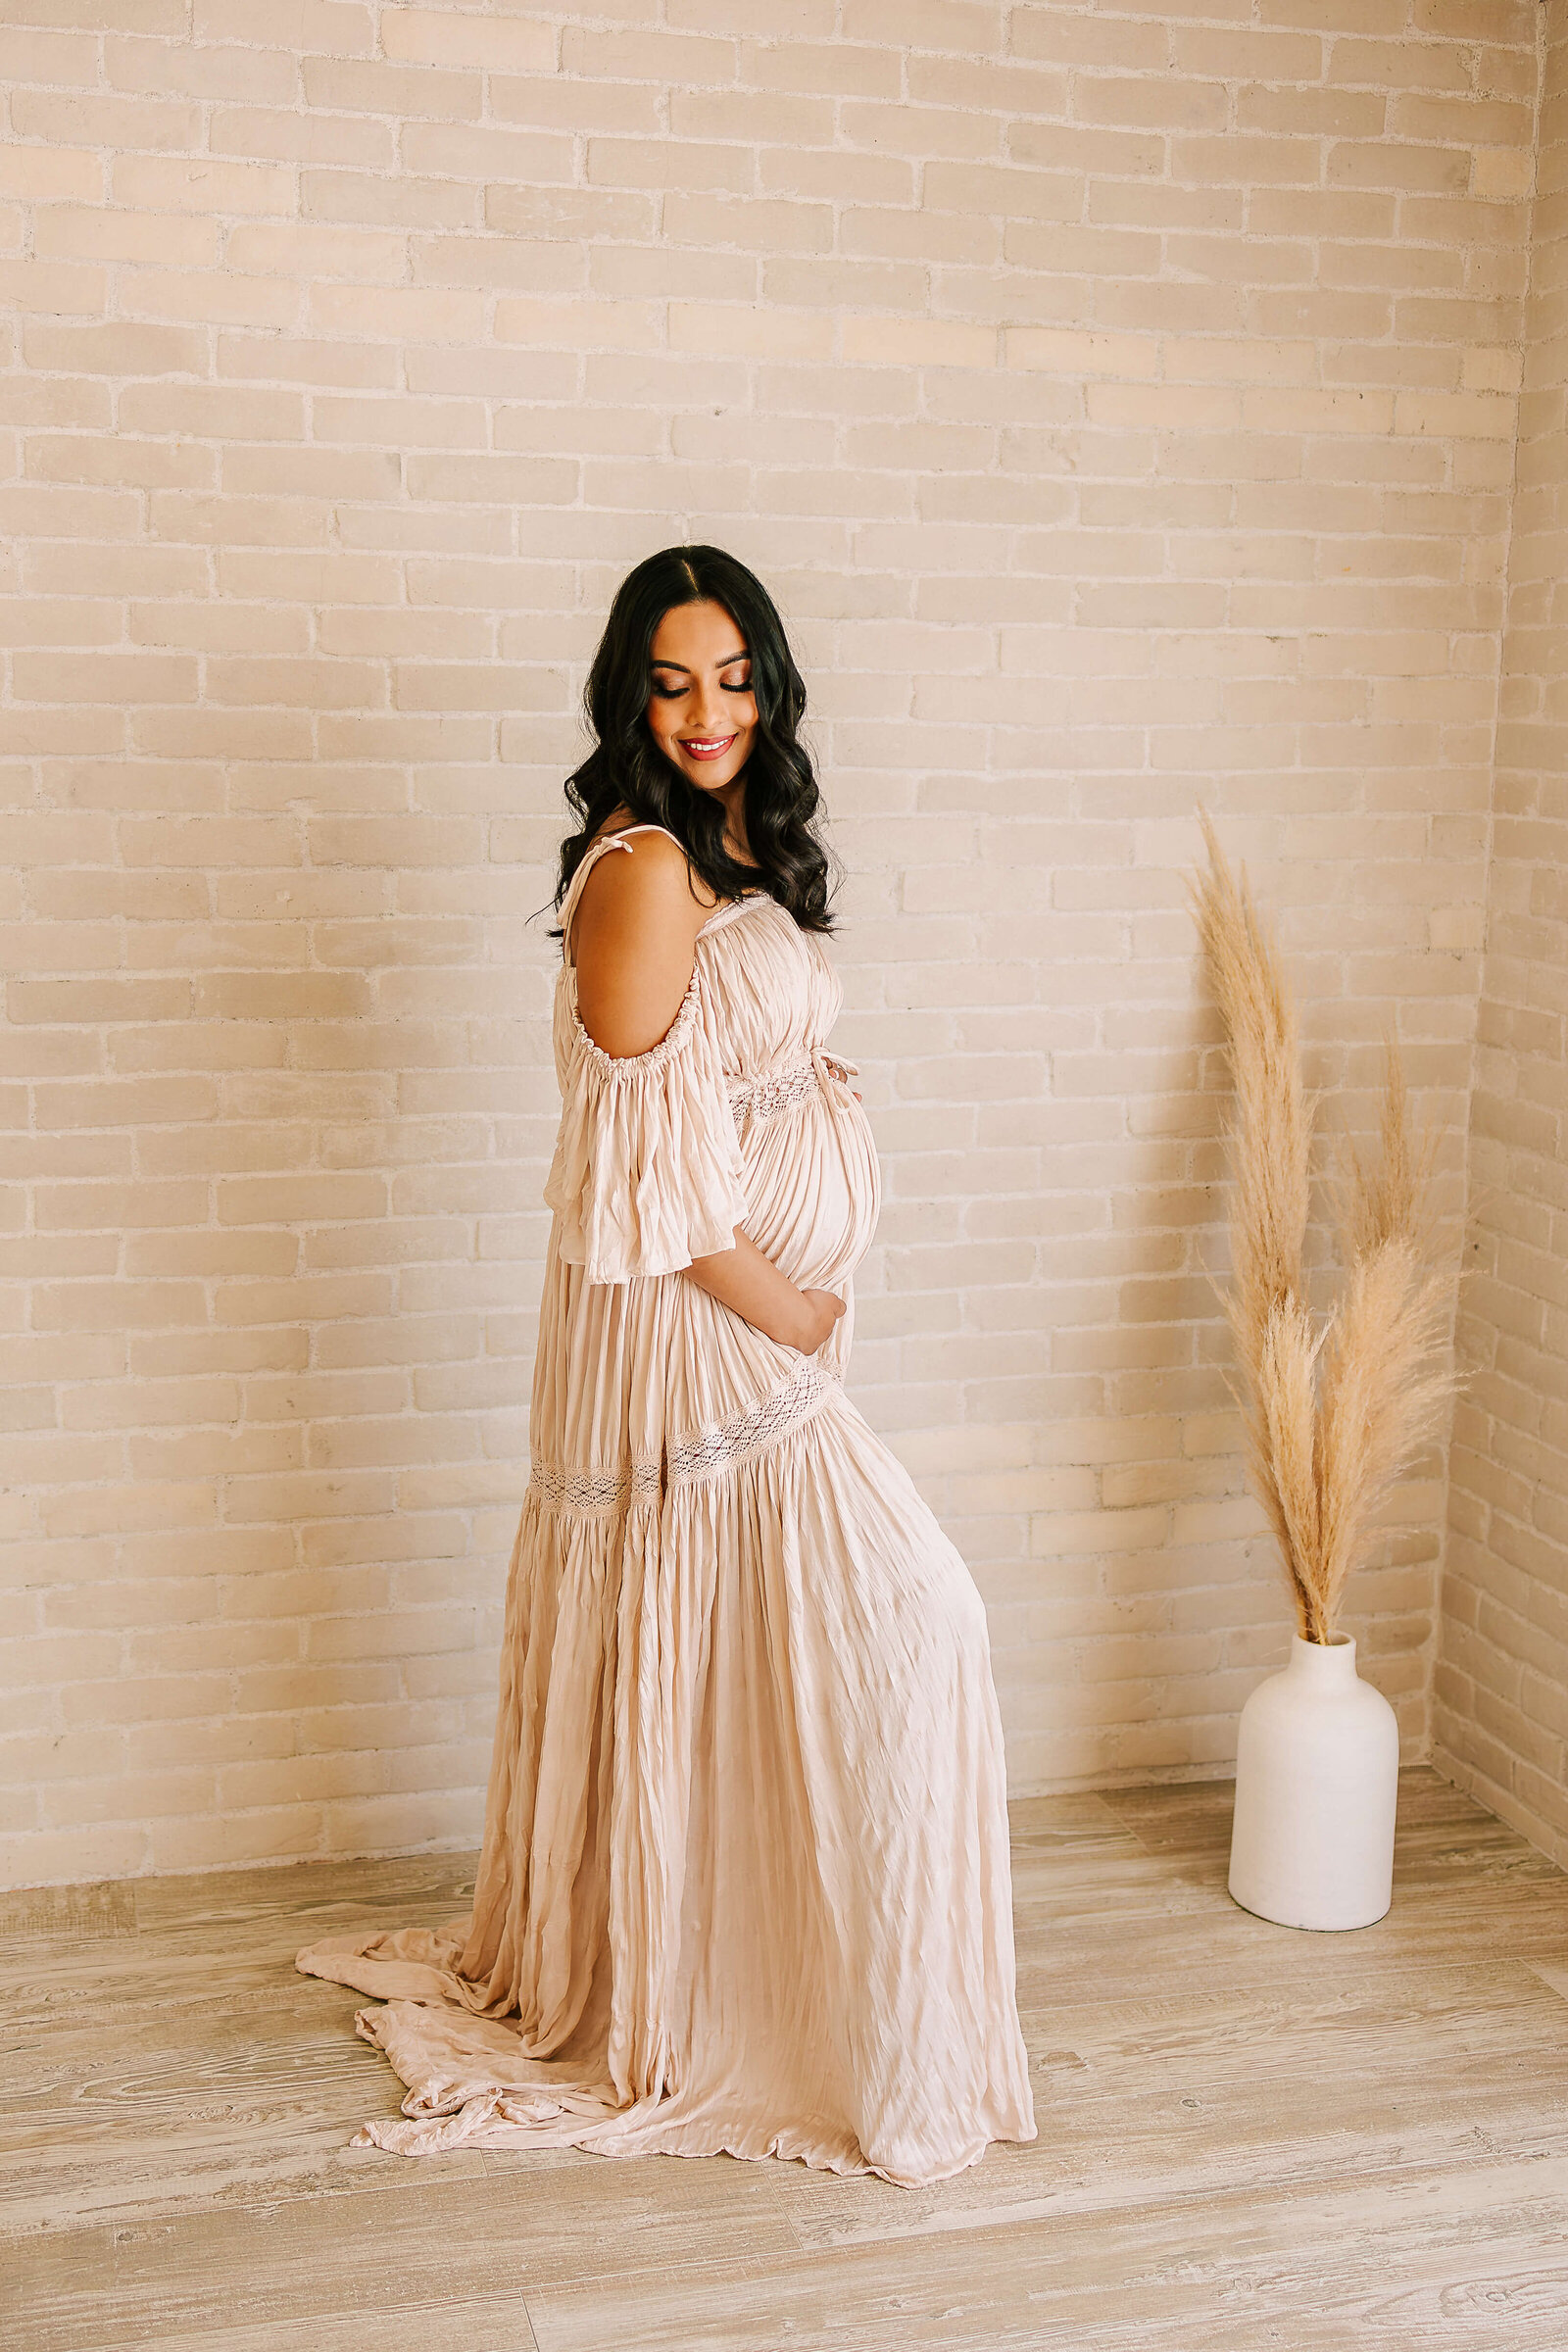 Expectnat mom wearing reclamation dress in natural boho studion in Orange County by Ashley Nicole Photography.